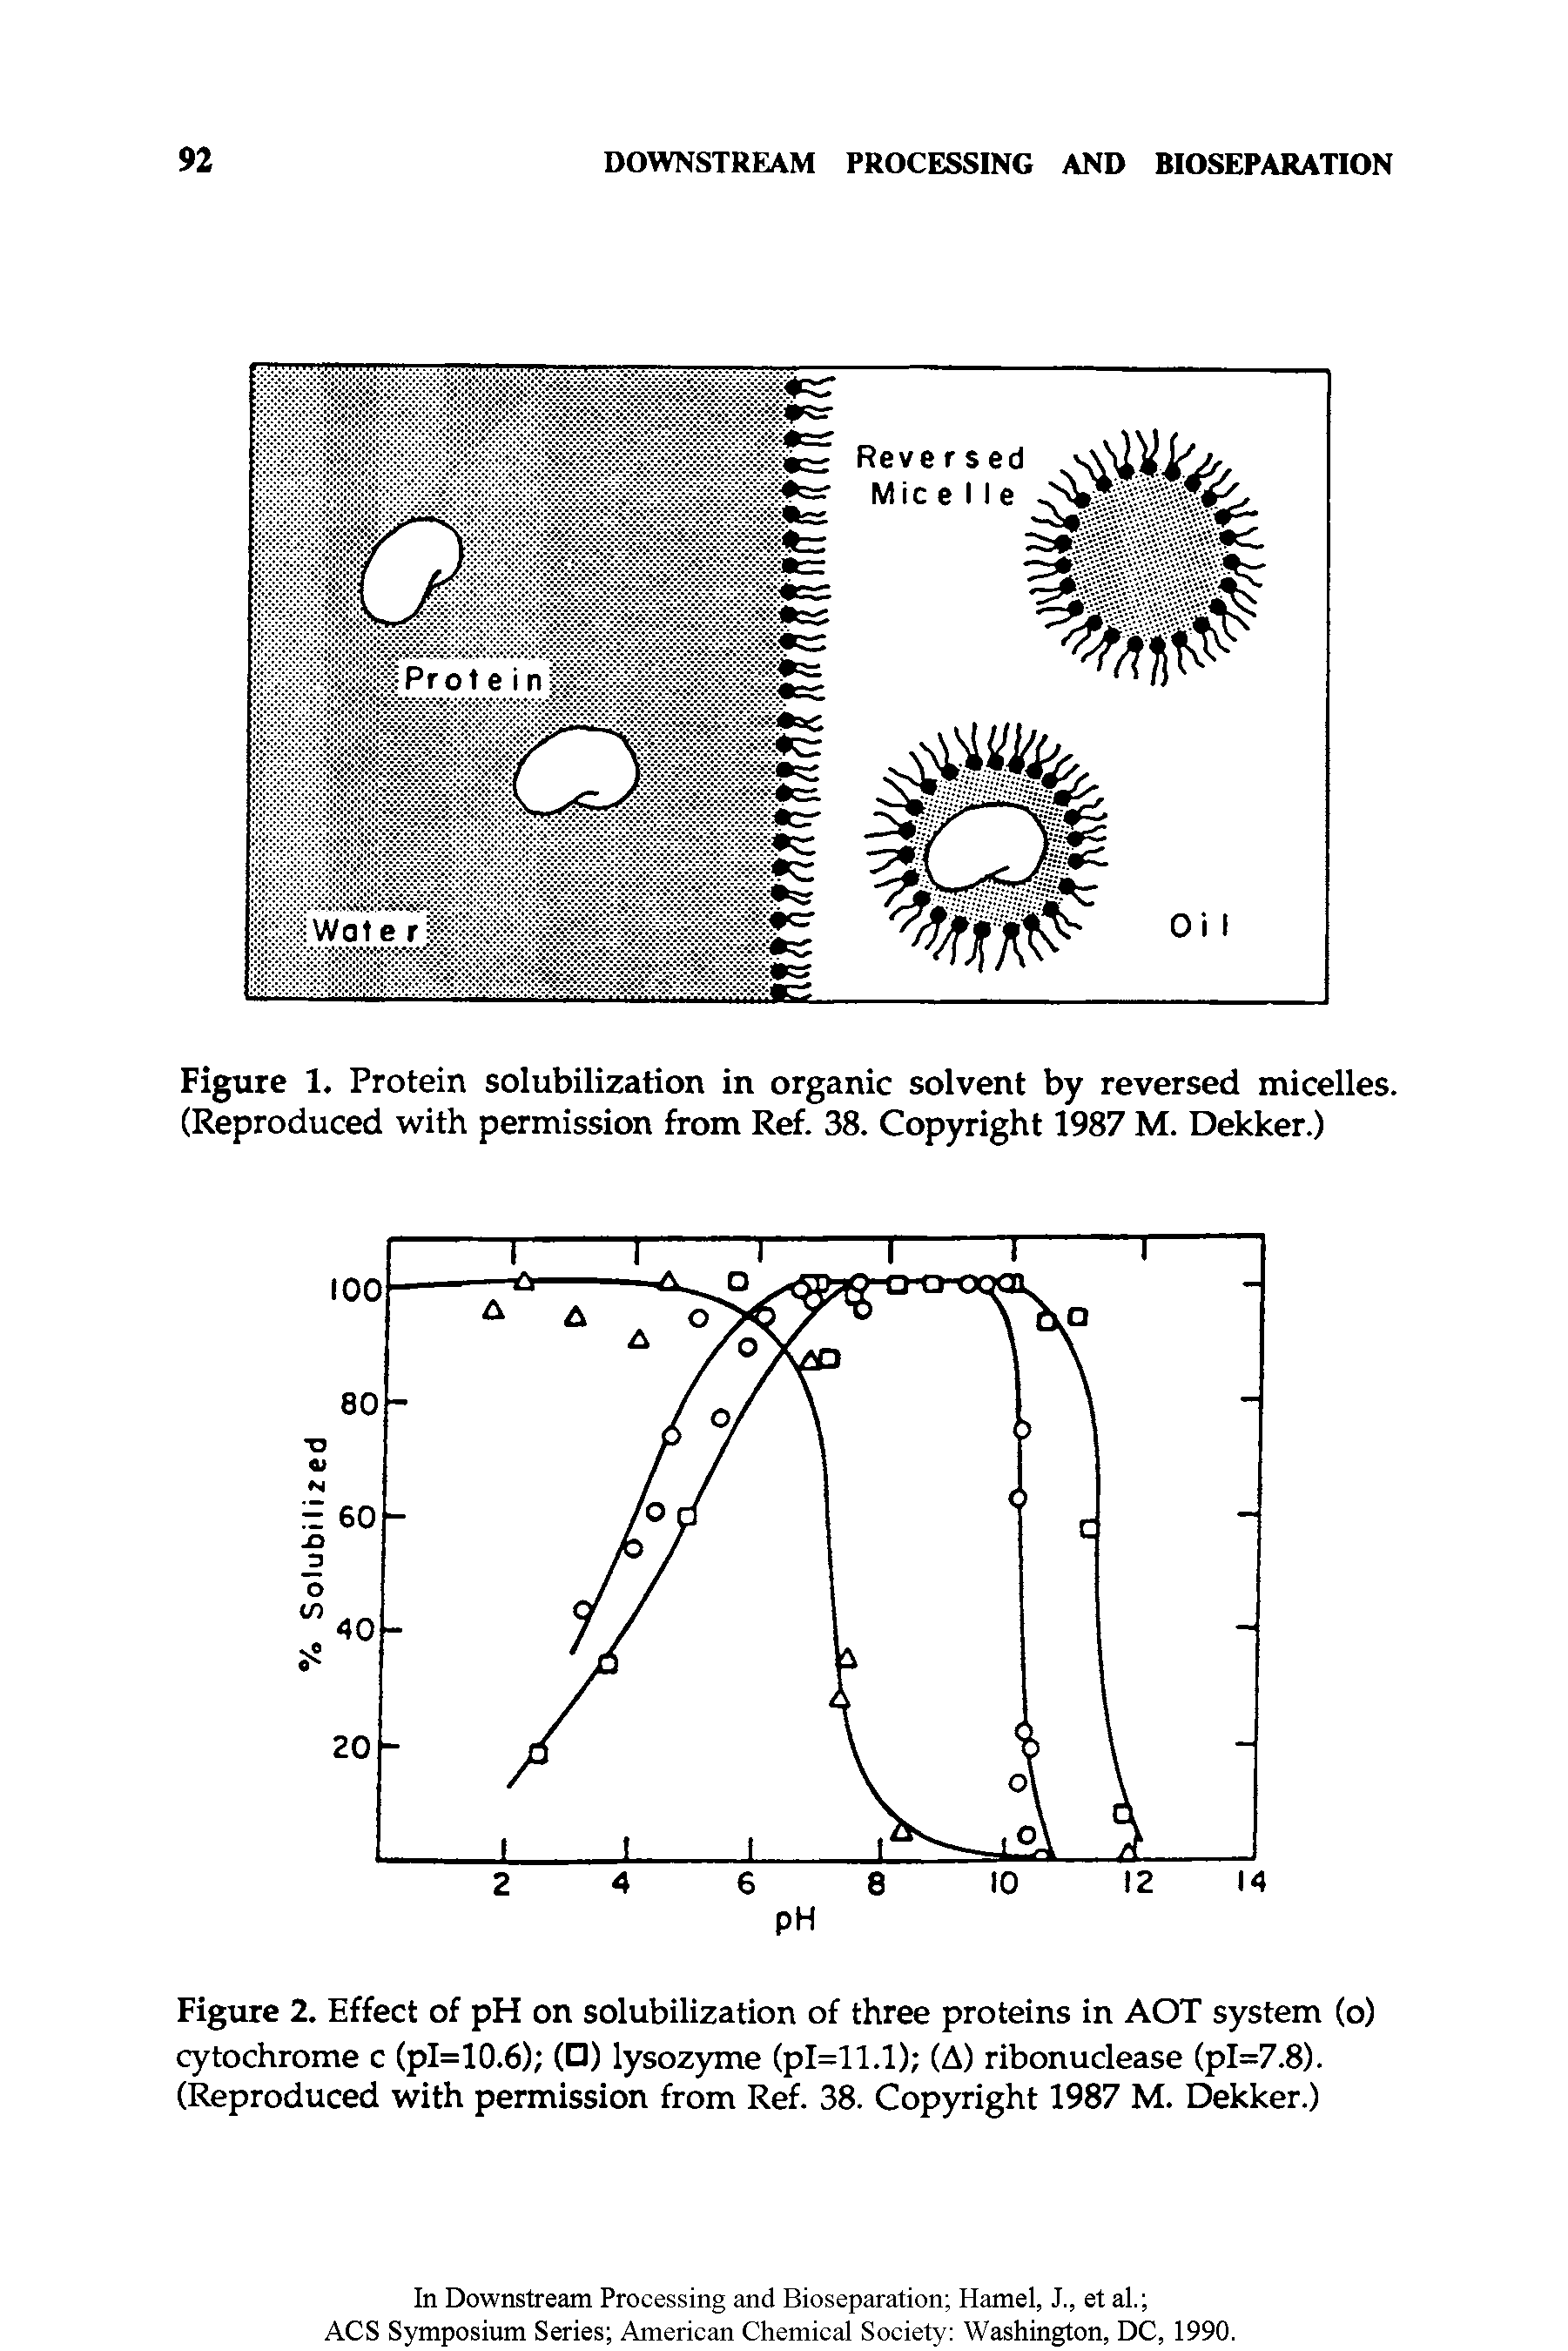 Figure 2. Effect of pH on solubilization of three proteins in AOT system (o) cytochrome c (pl=10.6) ( ) lysozyme (pl=ll.l) (A) ribonuclease (pl=7.8). (Reproduced with permission from Ref. 38. Copyright 1987 M. Dekker.)...